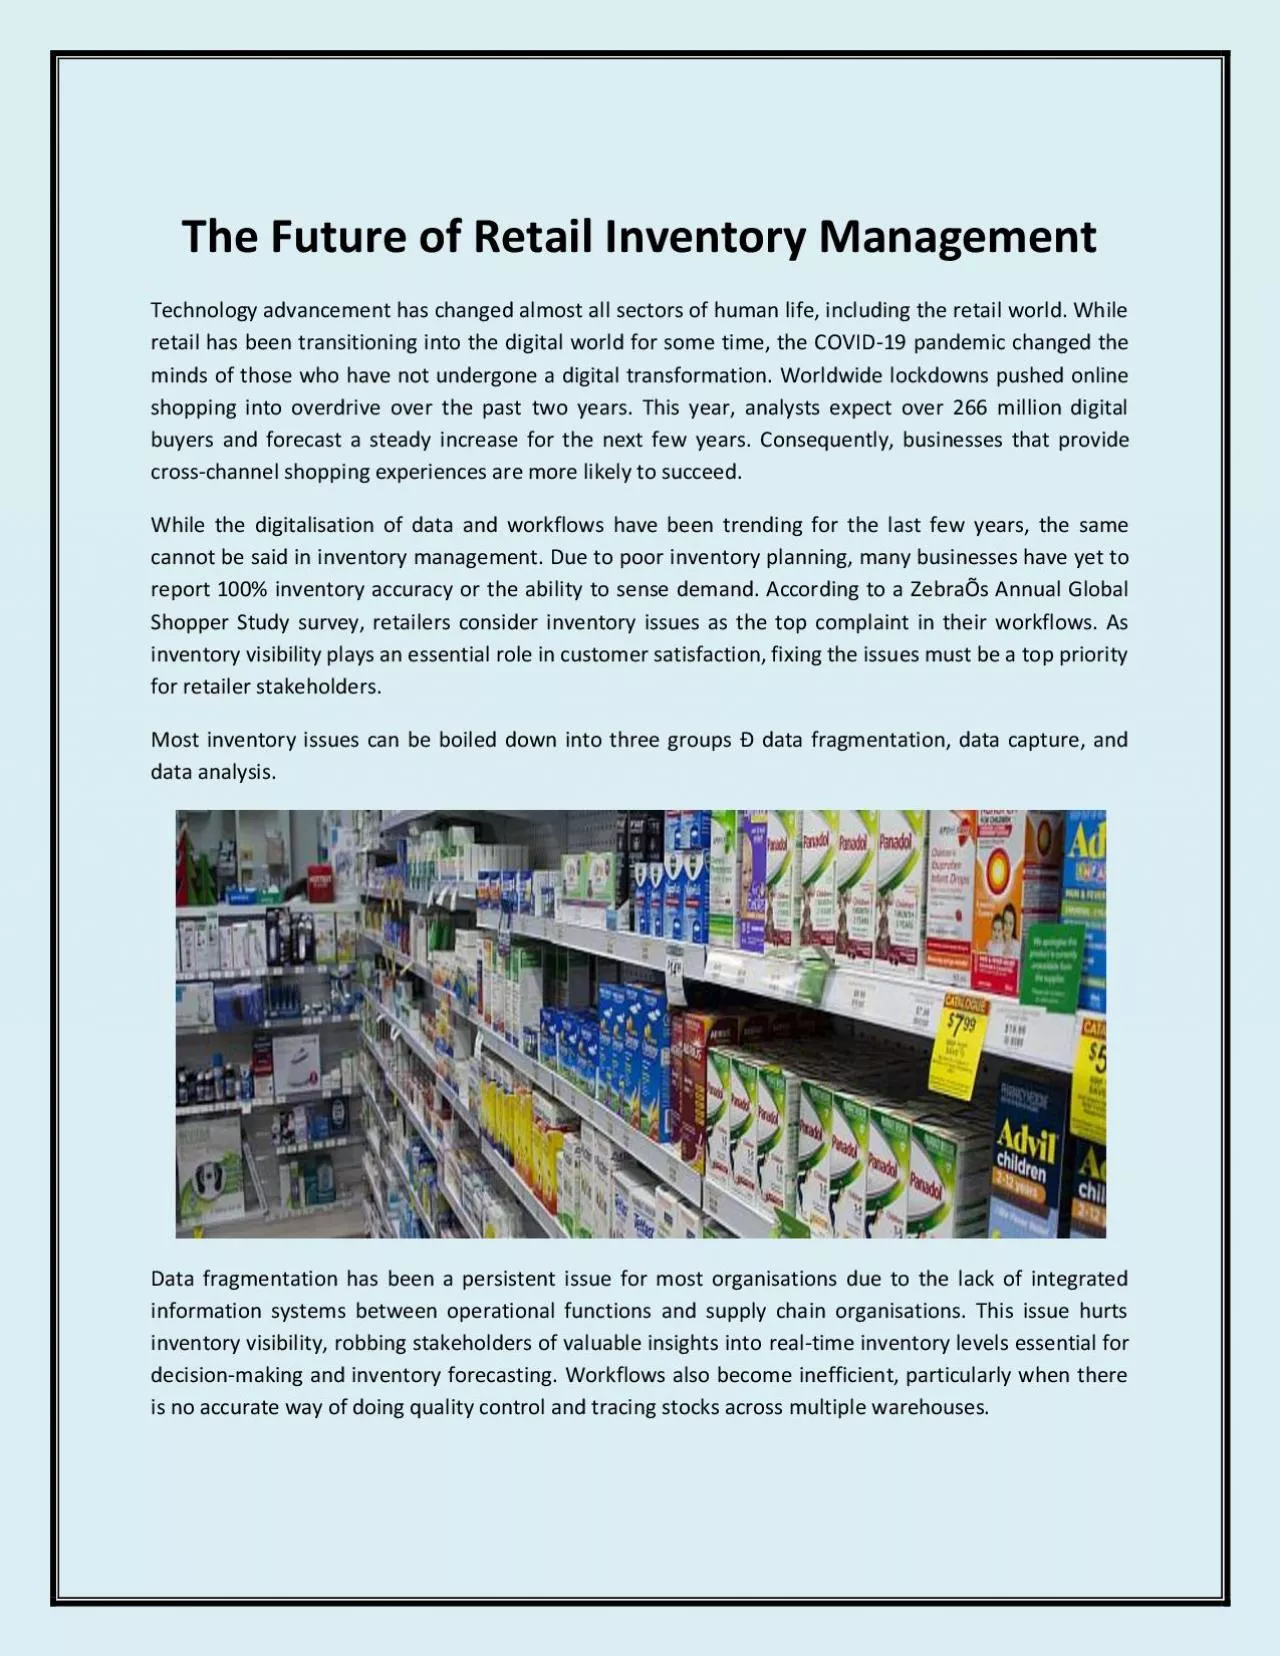 The Future of Retail Inventory Management